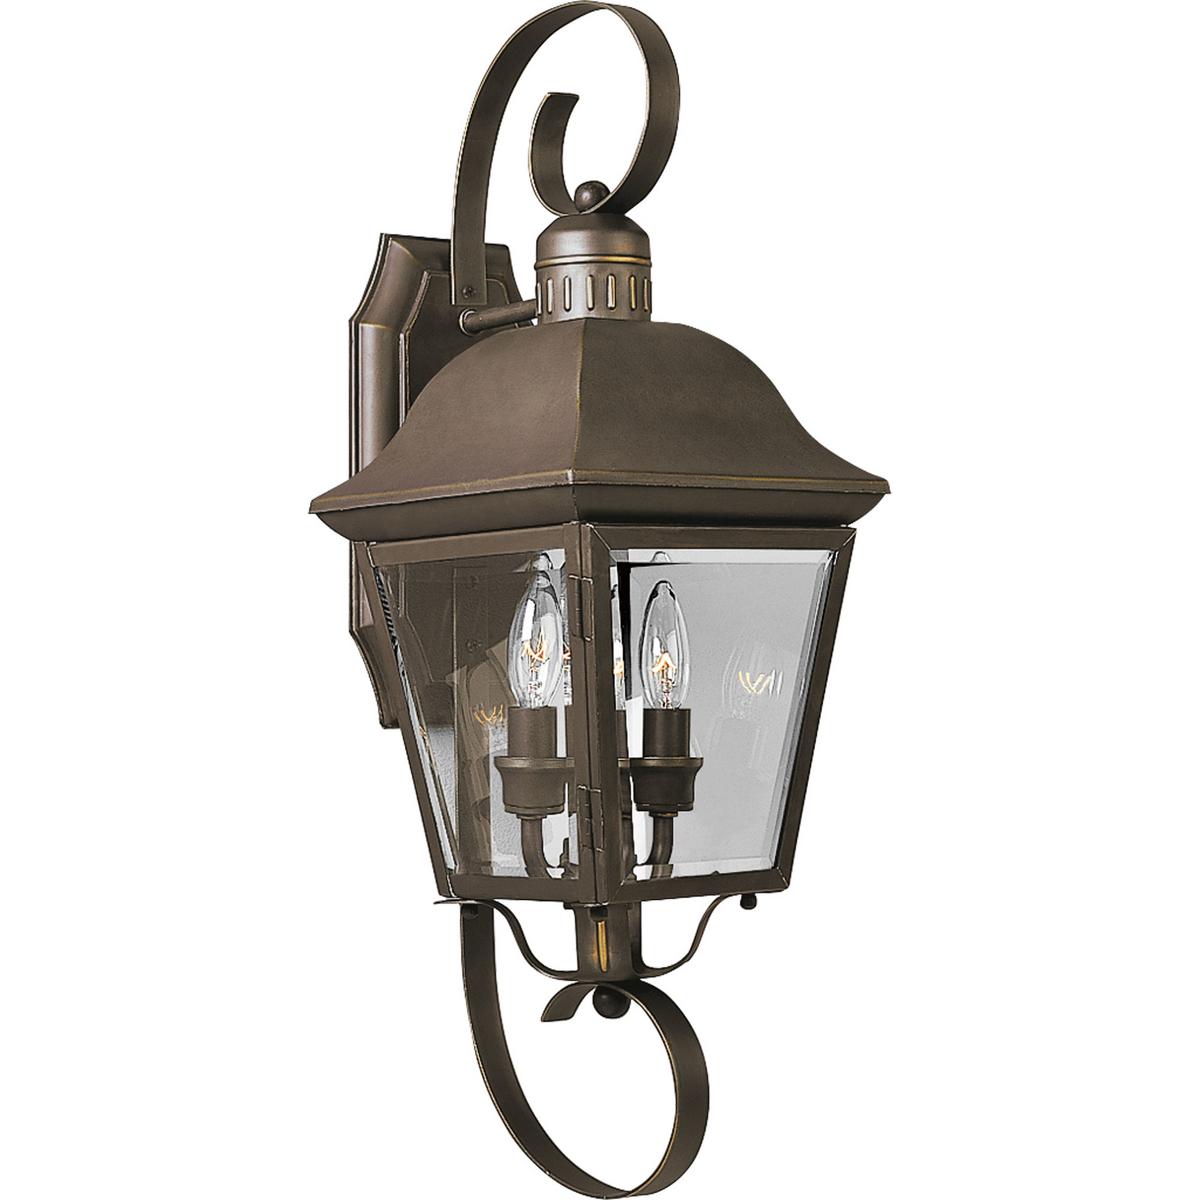 Hubbell P5688-20 The Andover collection two-light medium wall lantern with aluminum construction, offers a mixture of traditional and country style for a variety of applications. Beveled glass panels allow optimum brightness. Hinged door for easy relamping.  ; A mixture o